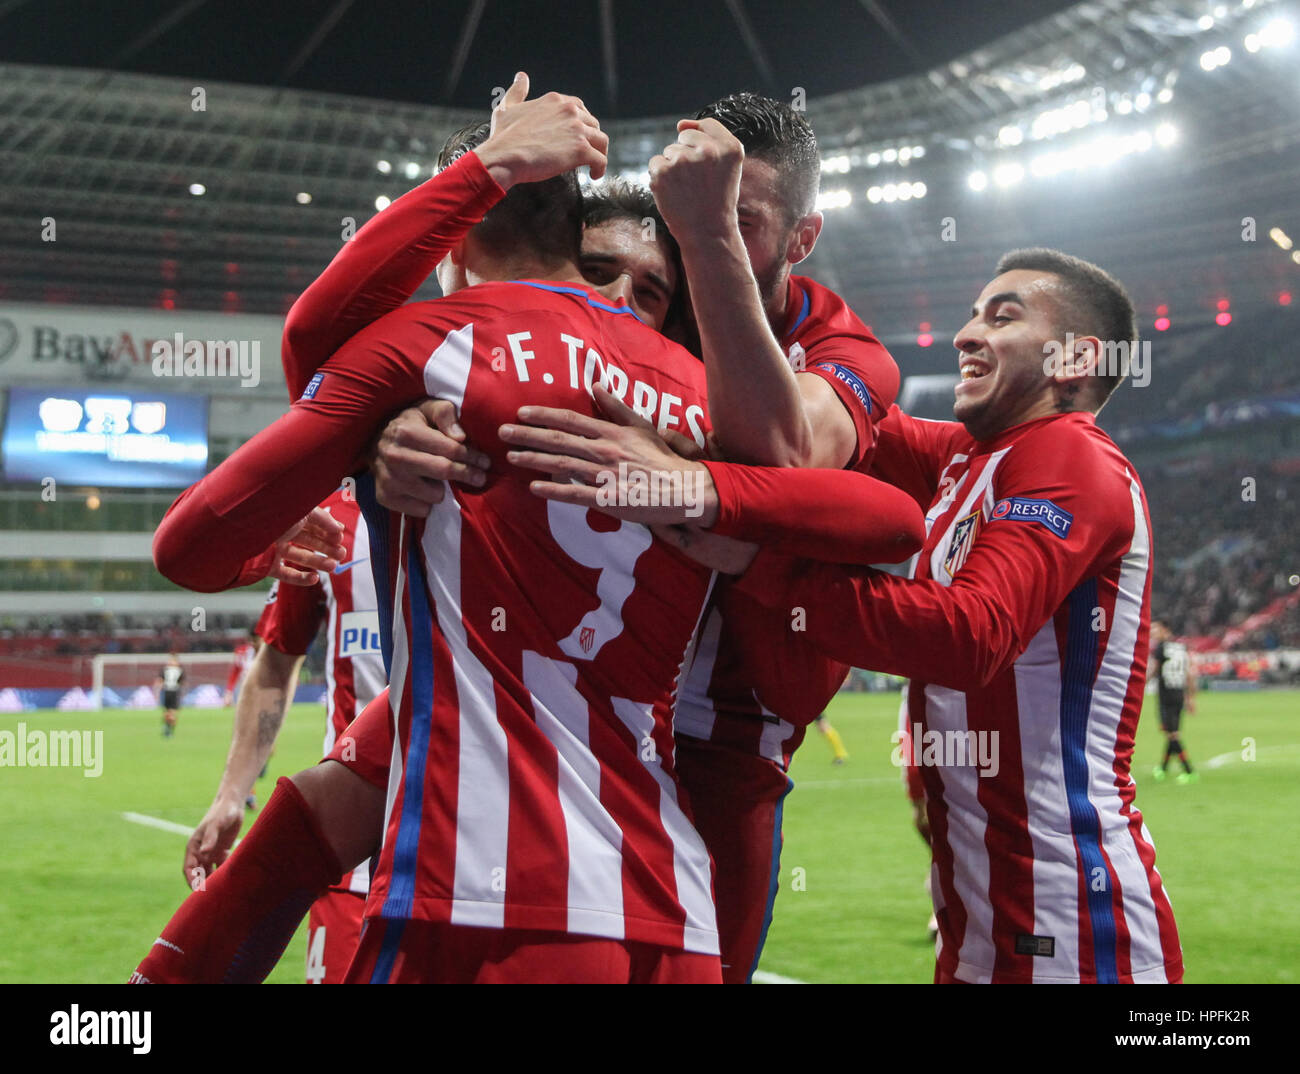 (170222) -- LEVERKUSEN, Feb. 22, 2017 -- Atletico Madrid's players celebrate scoring during the first leg match of Round of 16 of European Champions League between Bayer 04 Leverkusen and Atletico Madrid in Leverkusen, Germany, on Feb. 21, 2017. Leverkusen lost 2-4. (Xinhua/Shan Yuqi) Stock Photo